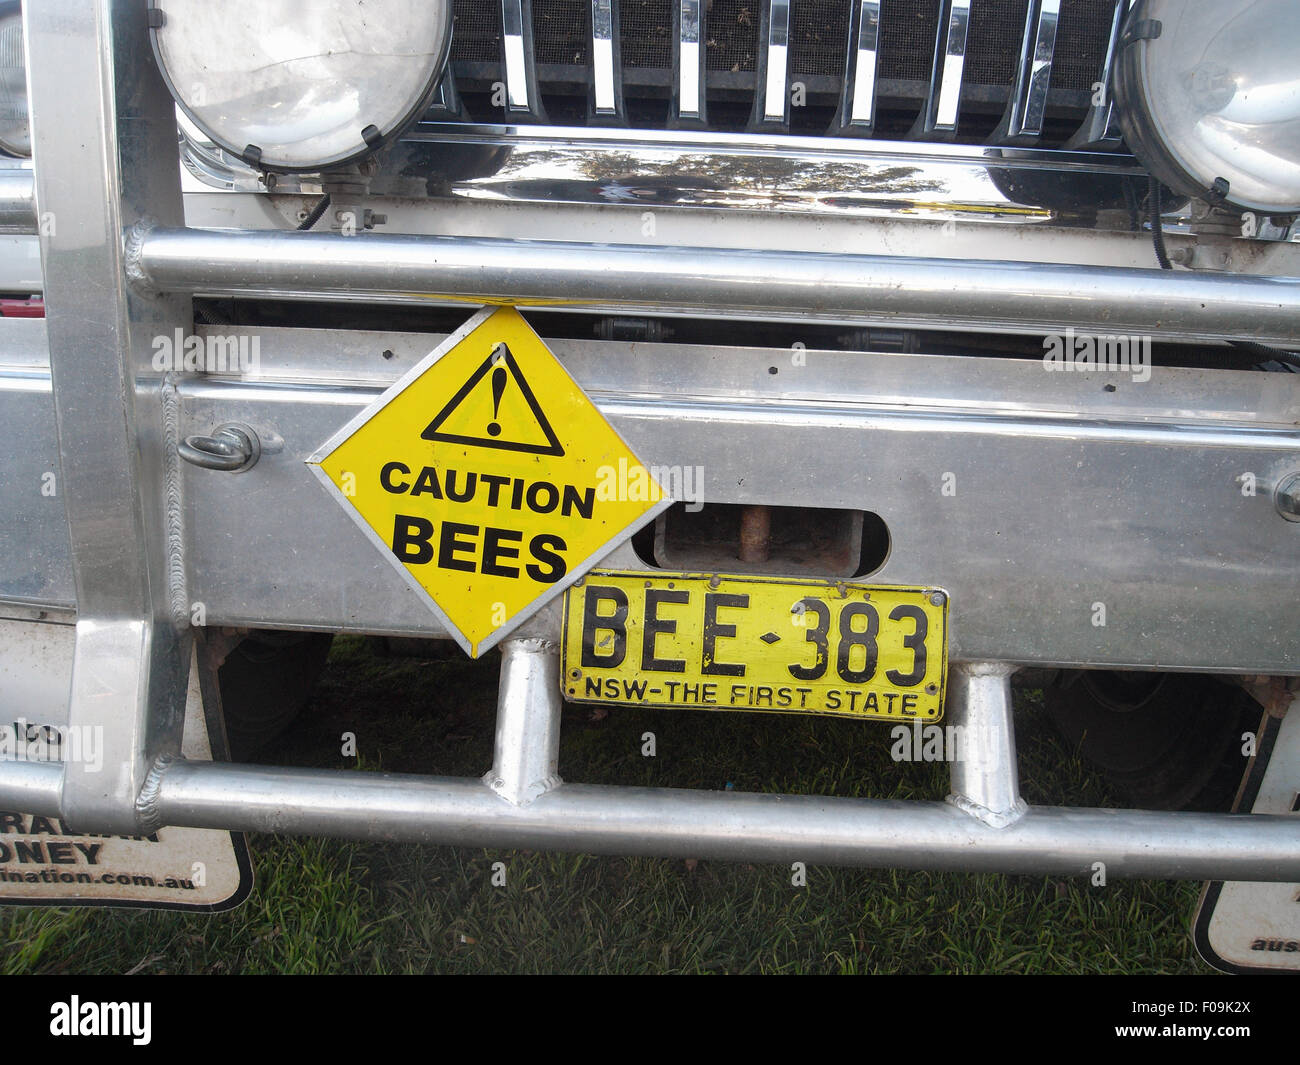 Truck of beekeeper providing pollination services to the agricultural industry, Orange, NSW, Australia. No PR Stock Photo